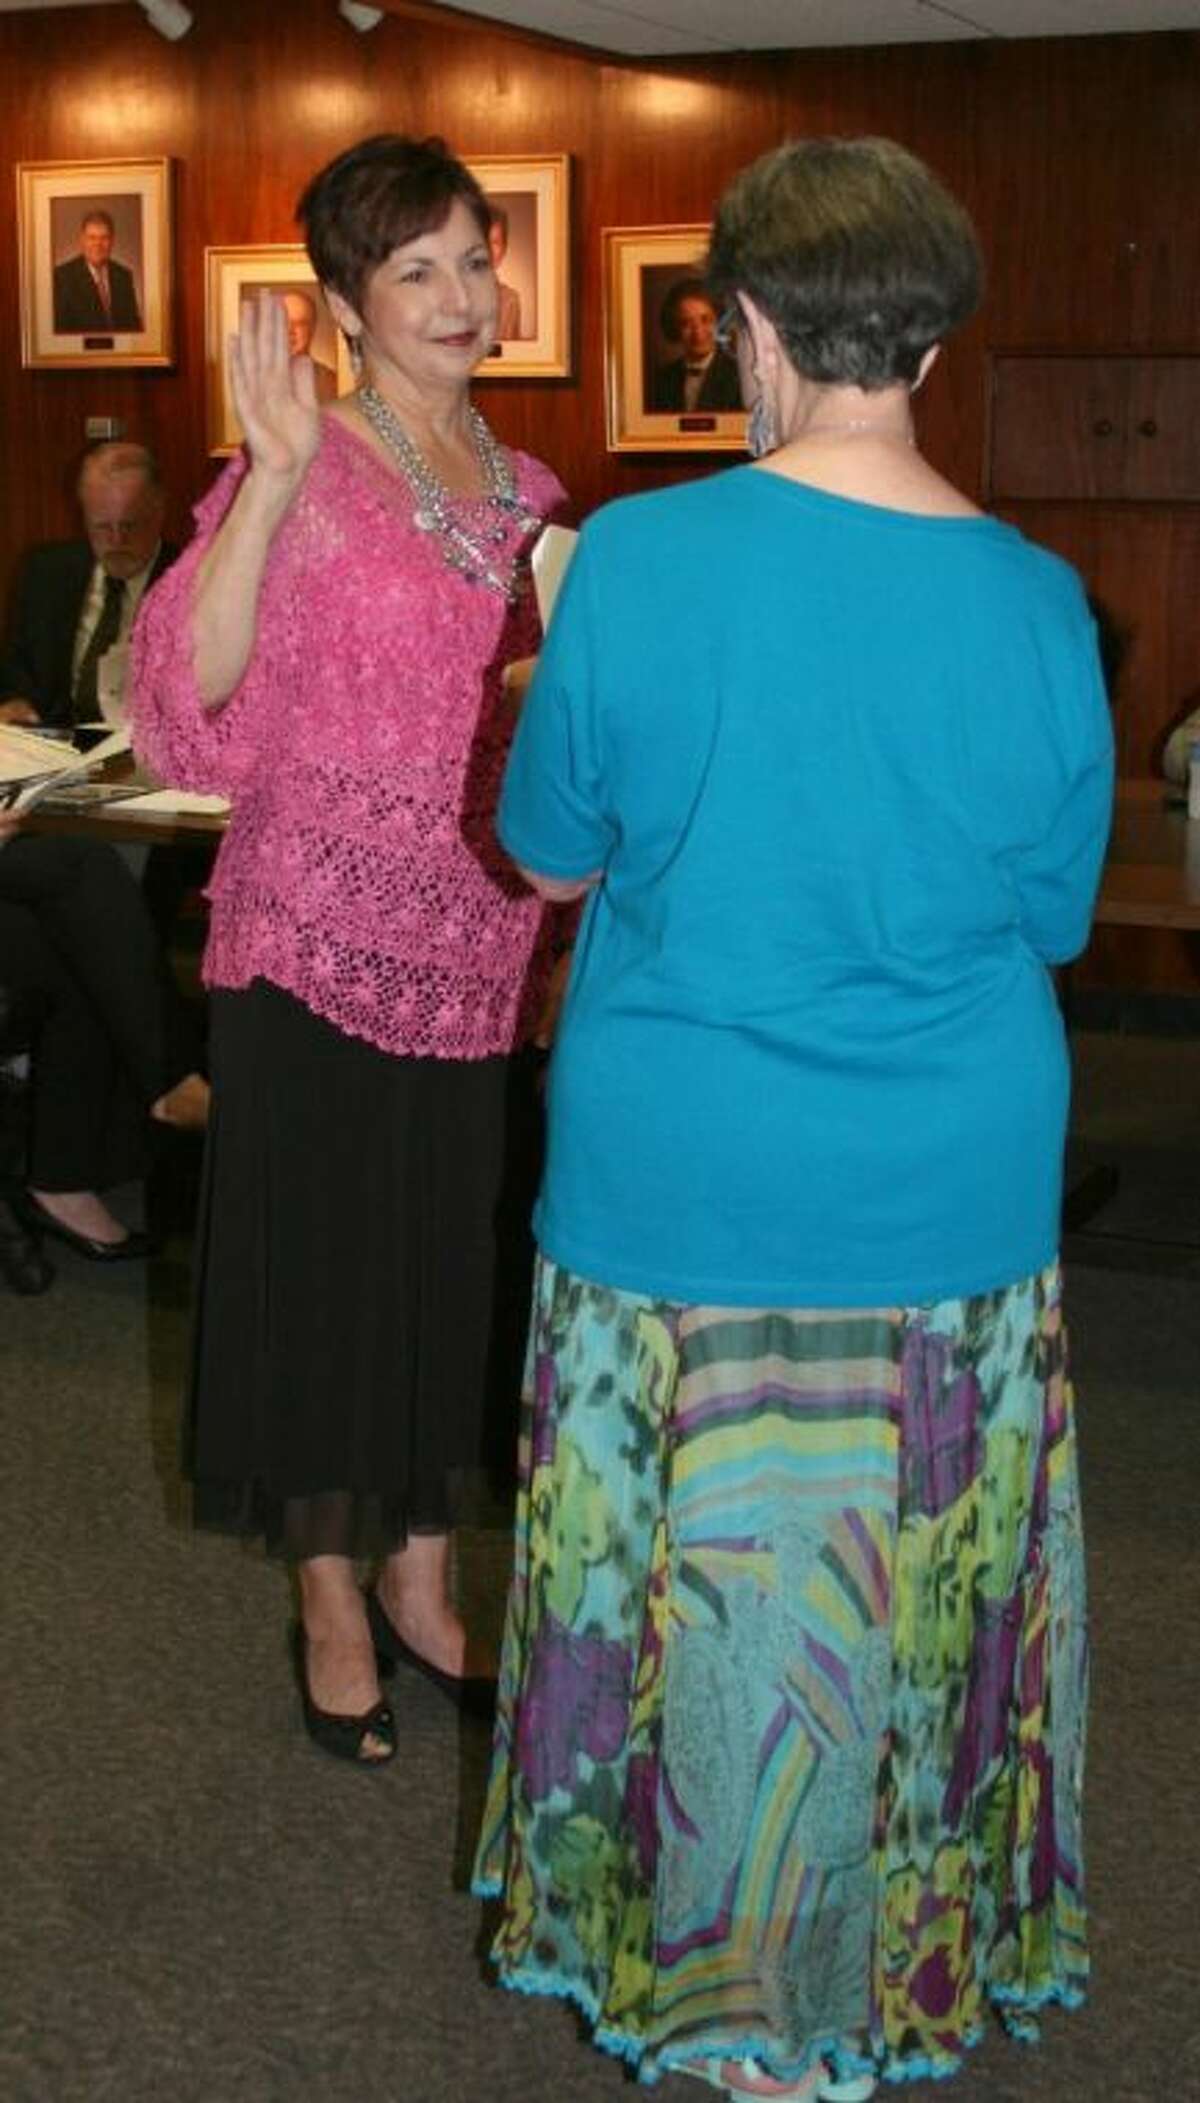 Rosalie Kettler takes the oath of office for a second term on the College of the Mainland board of trustees.